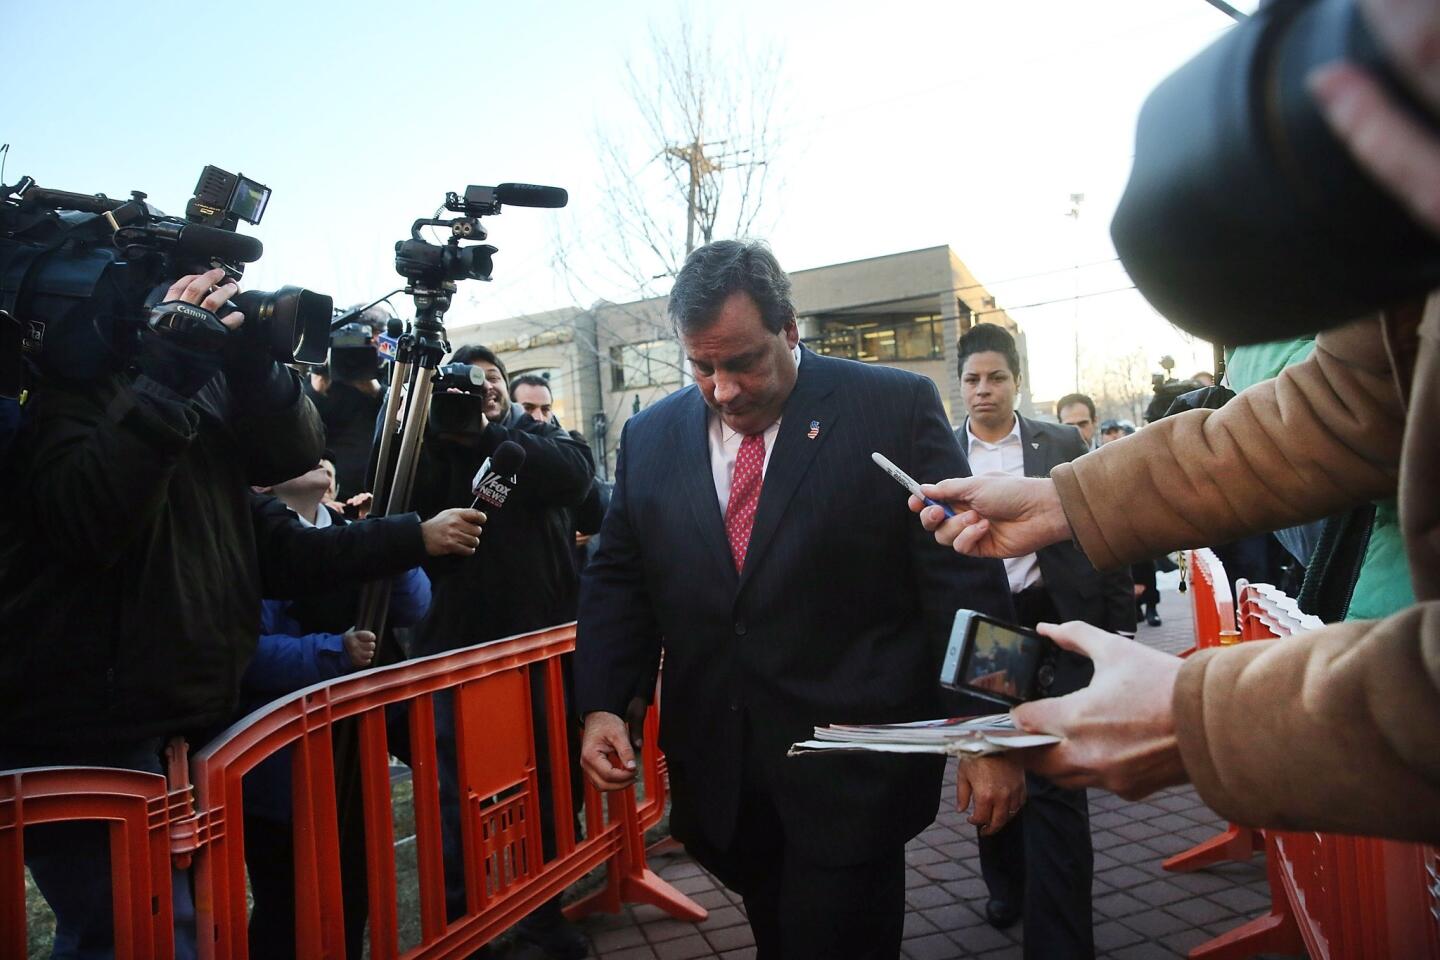 New Jersey Gov. Chris Christie enters the Borough Hall in Fort Lee, N.J., to apologize to Mayor Mark Sokolich.